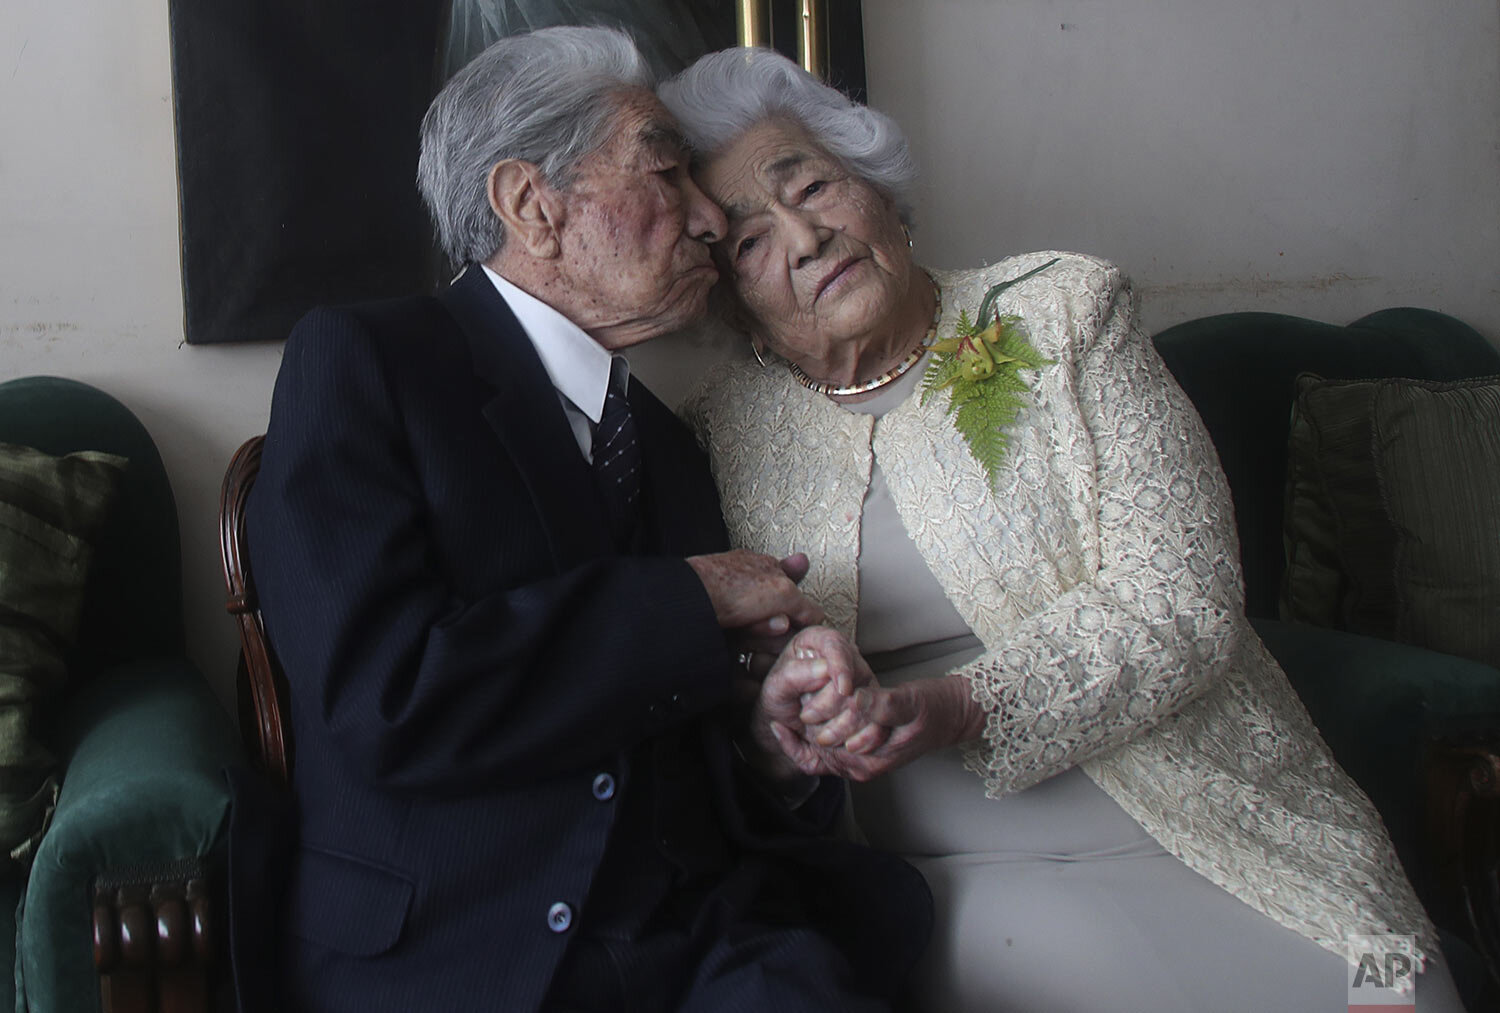  Married couple Julio Mora Tapia, 110, and Waldramina Quinteros, 104, recognized by the Guinness World Records as the oldest married couple in the world, because of their combined ages, pose for a photo at their home in Quito, Ecuador, Aug. 28, 2020.